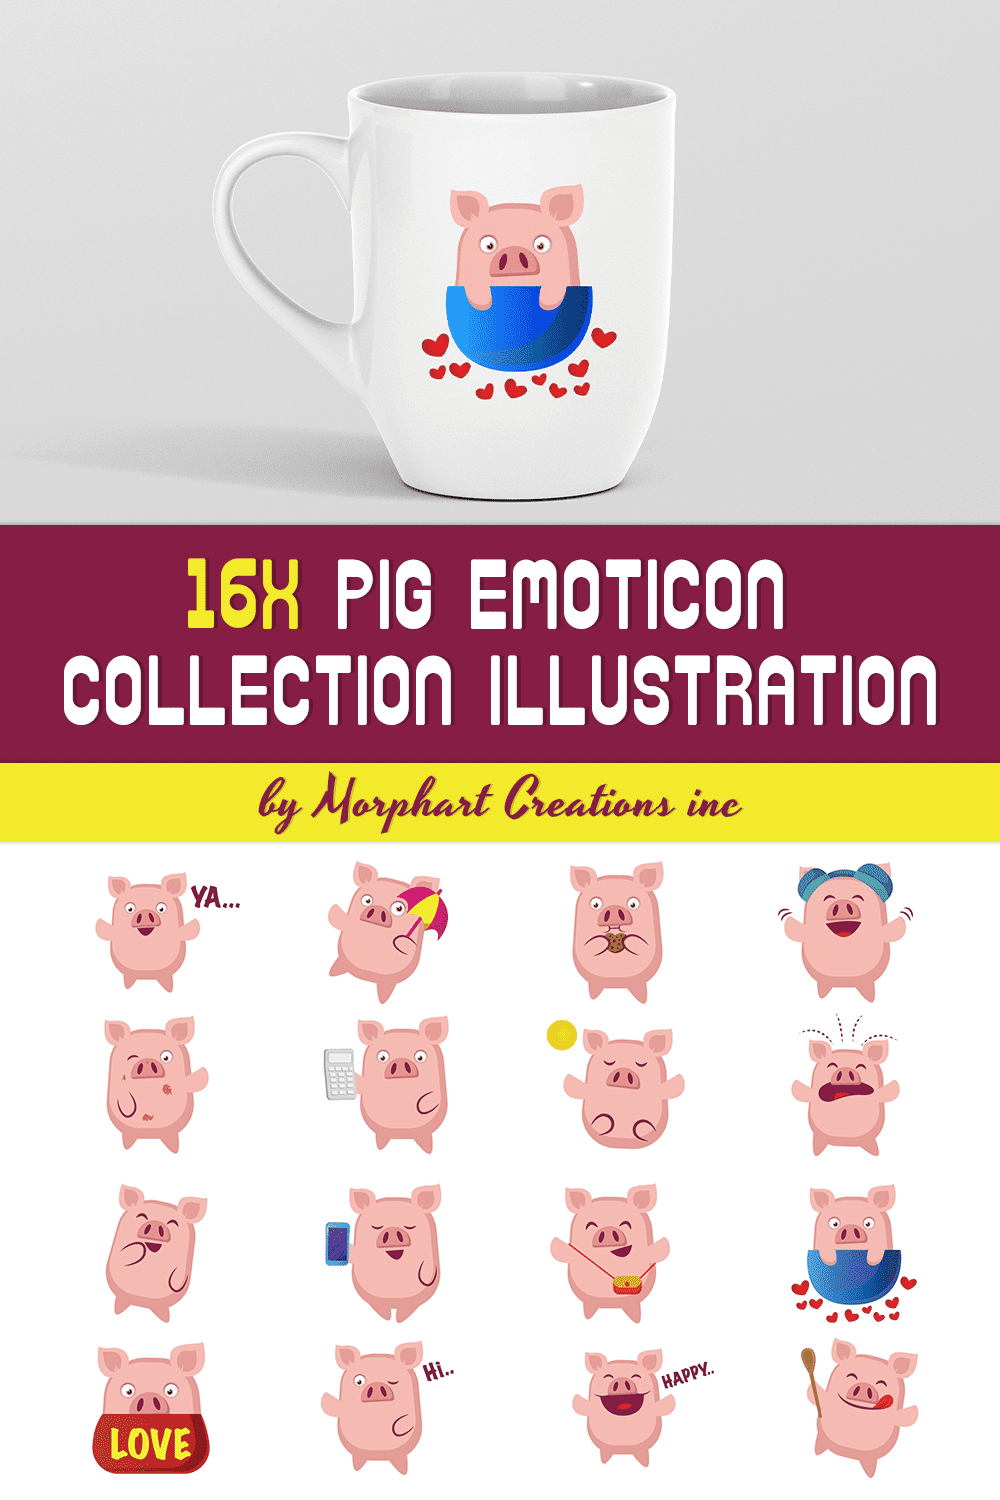 Collection of beautiful images of pigs emoticons.